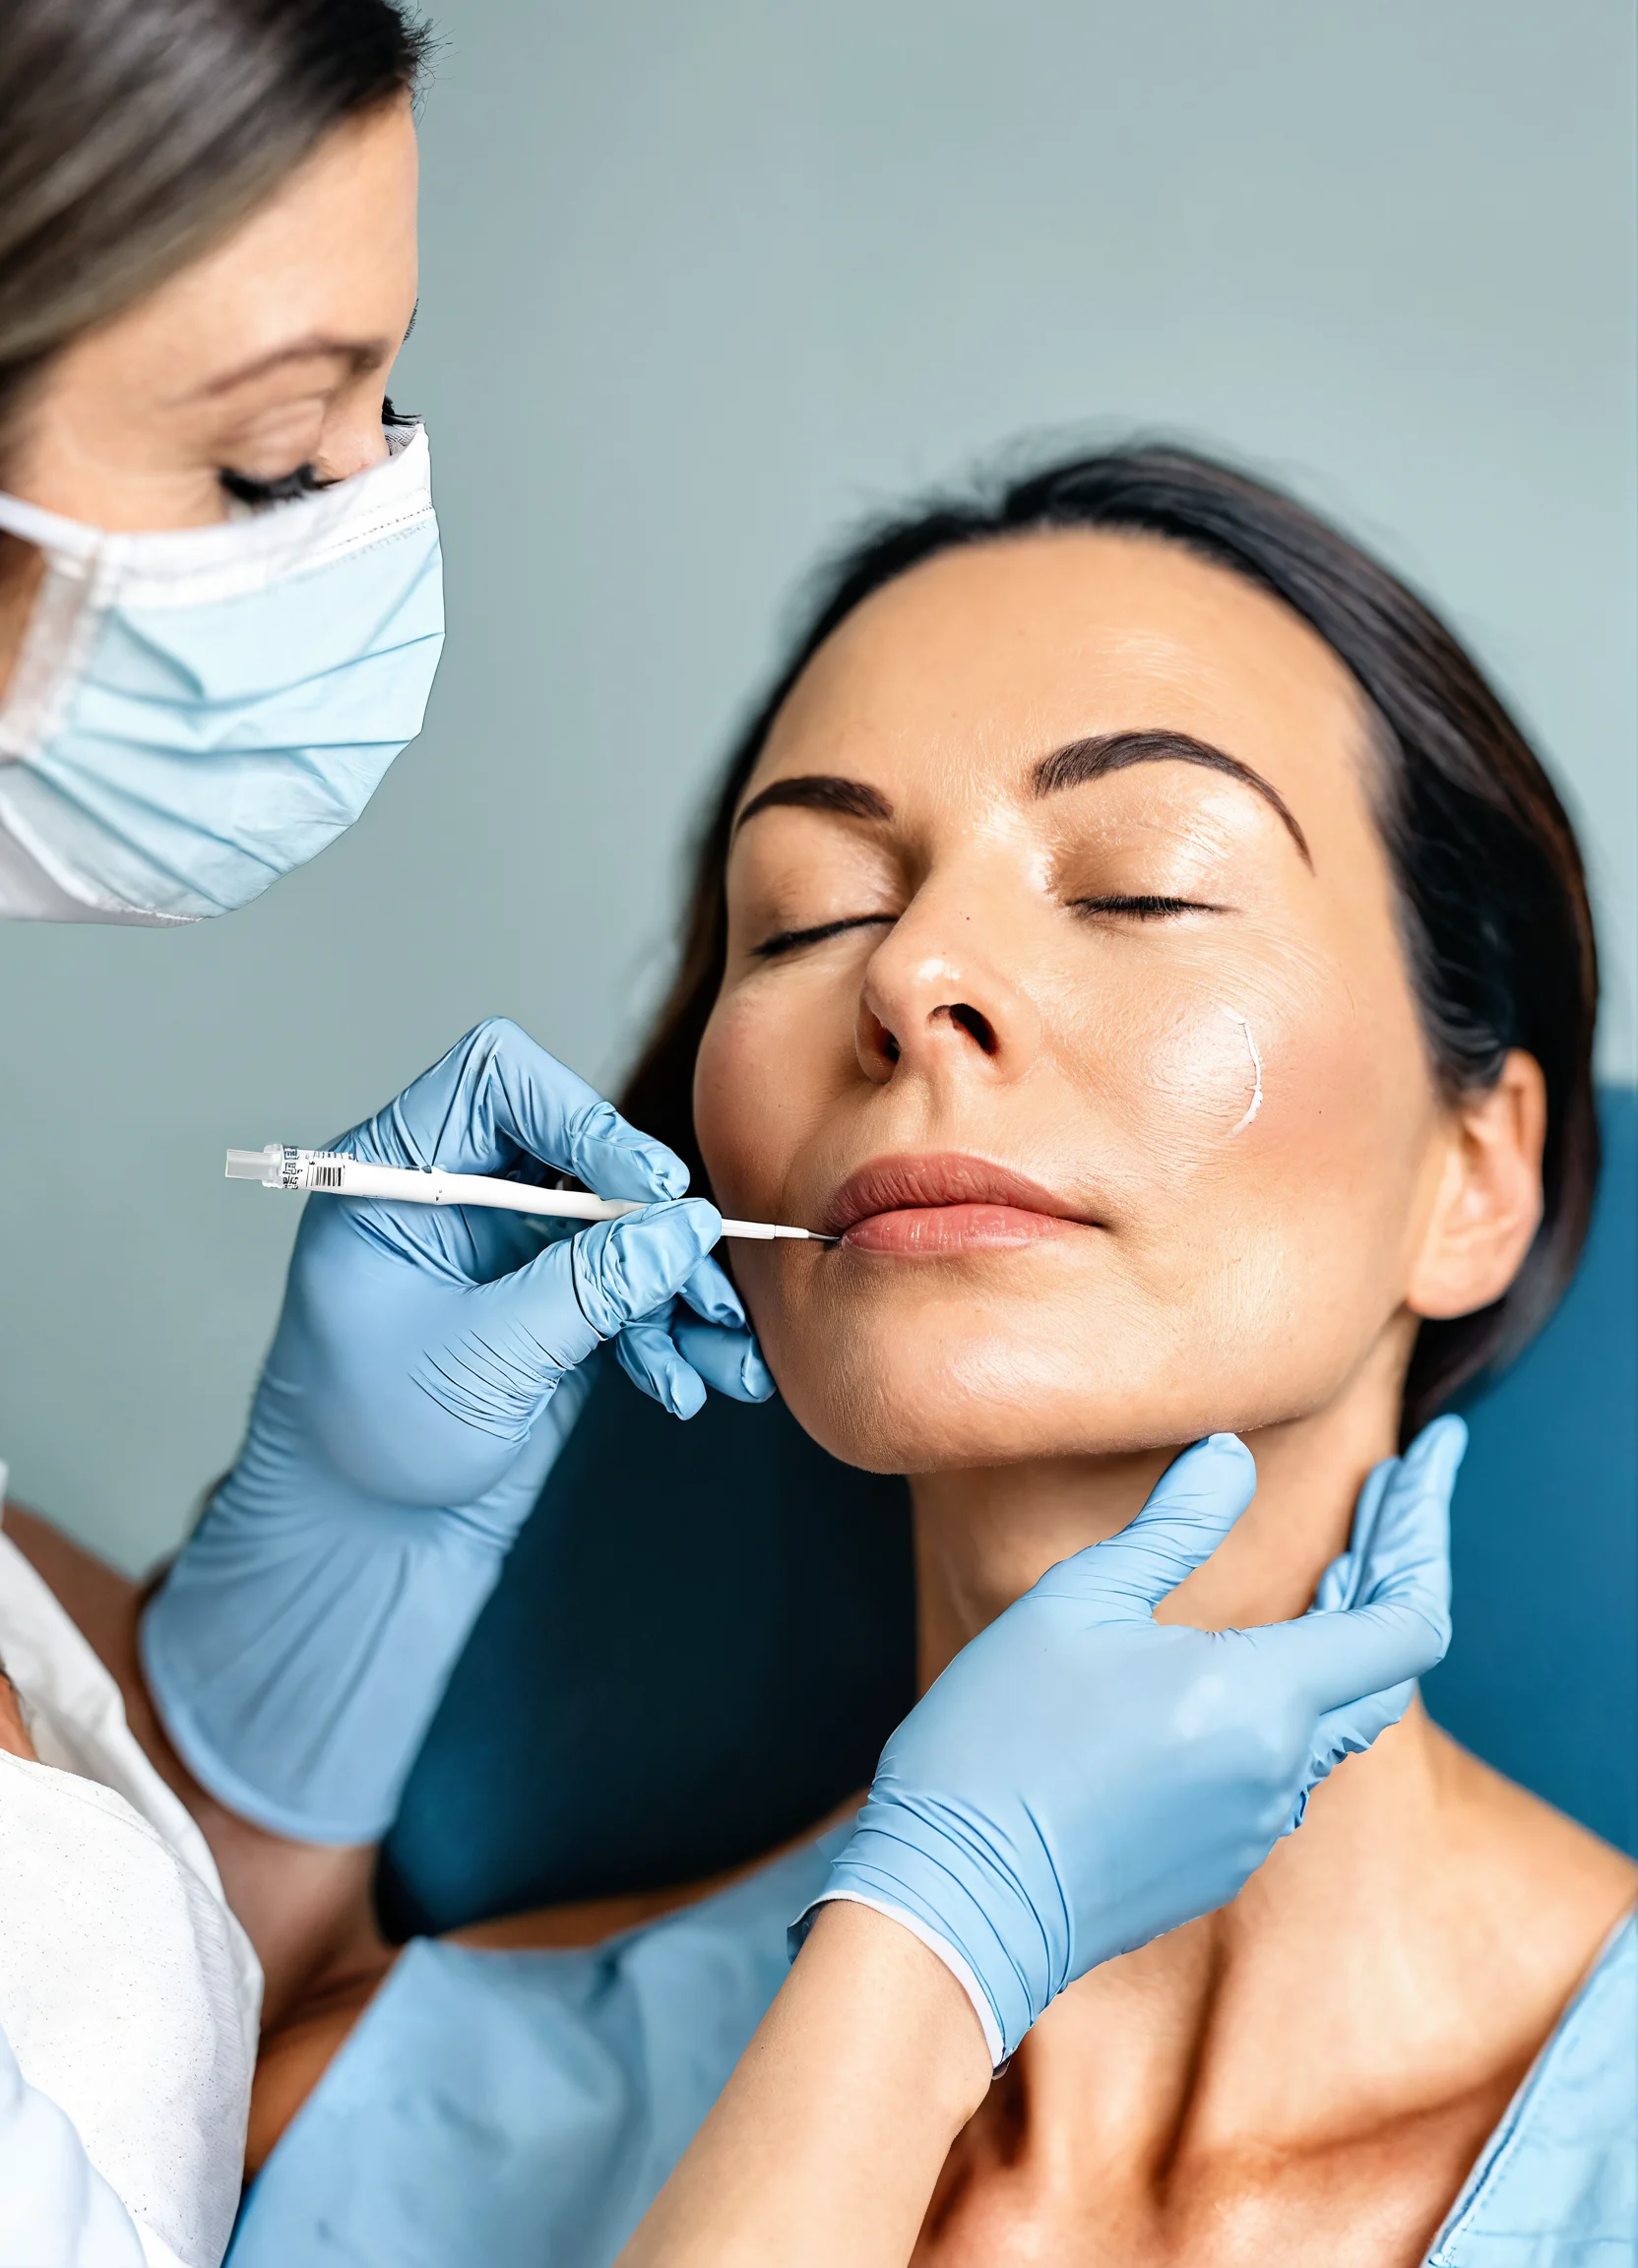 Q: I want to buy a cream with a “Botox effect.” Can skincare products work “like injections”?